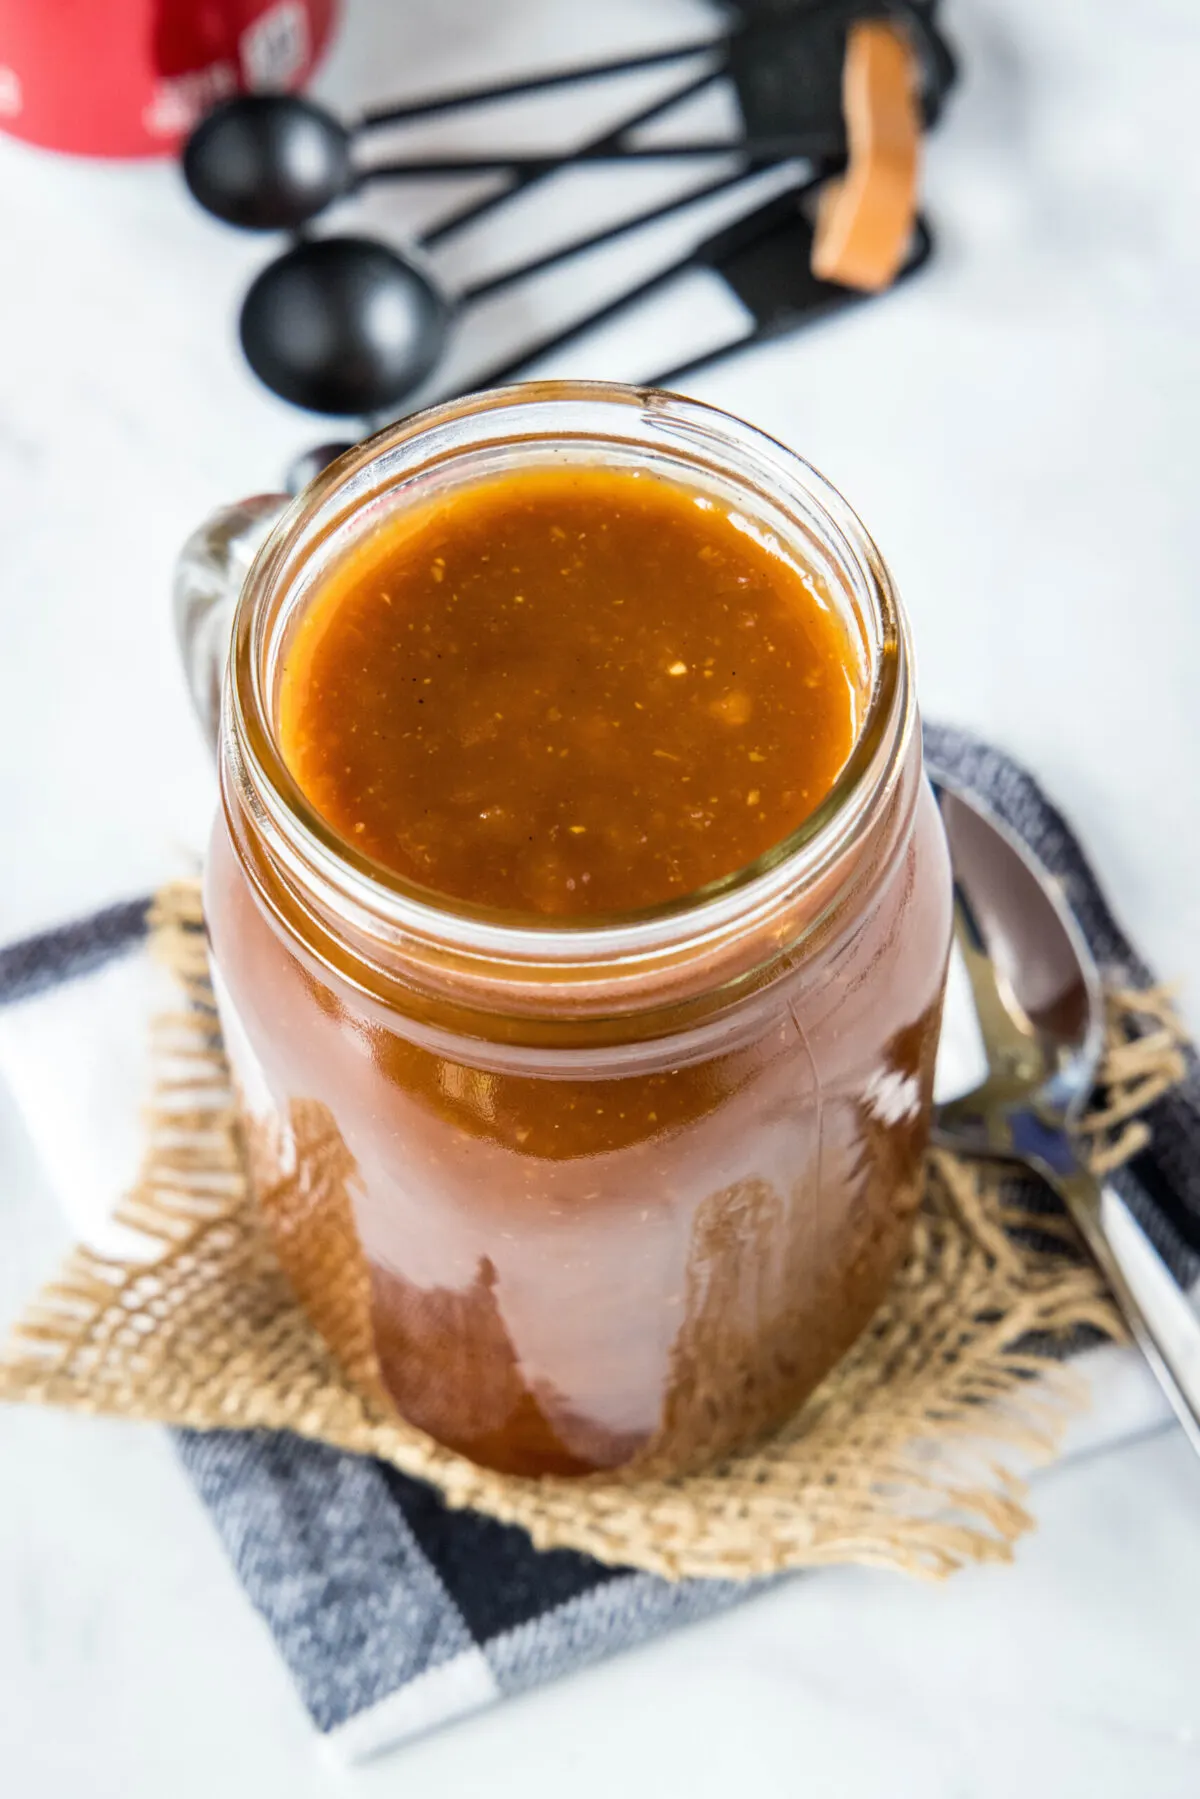 Overhead view of a jar of BBQ sauce next to a spoon and measuring spoons